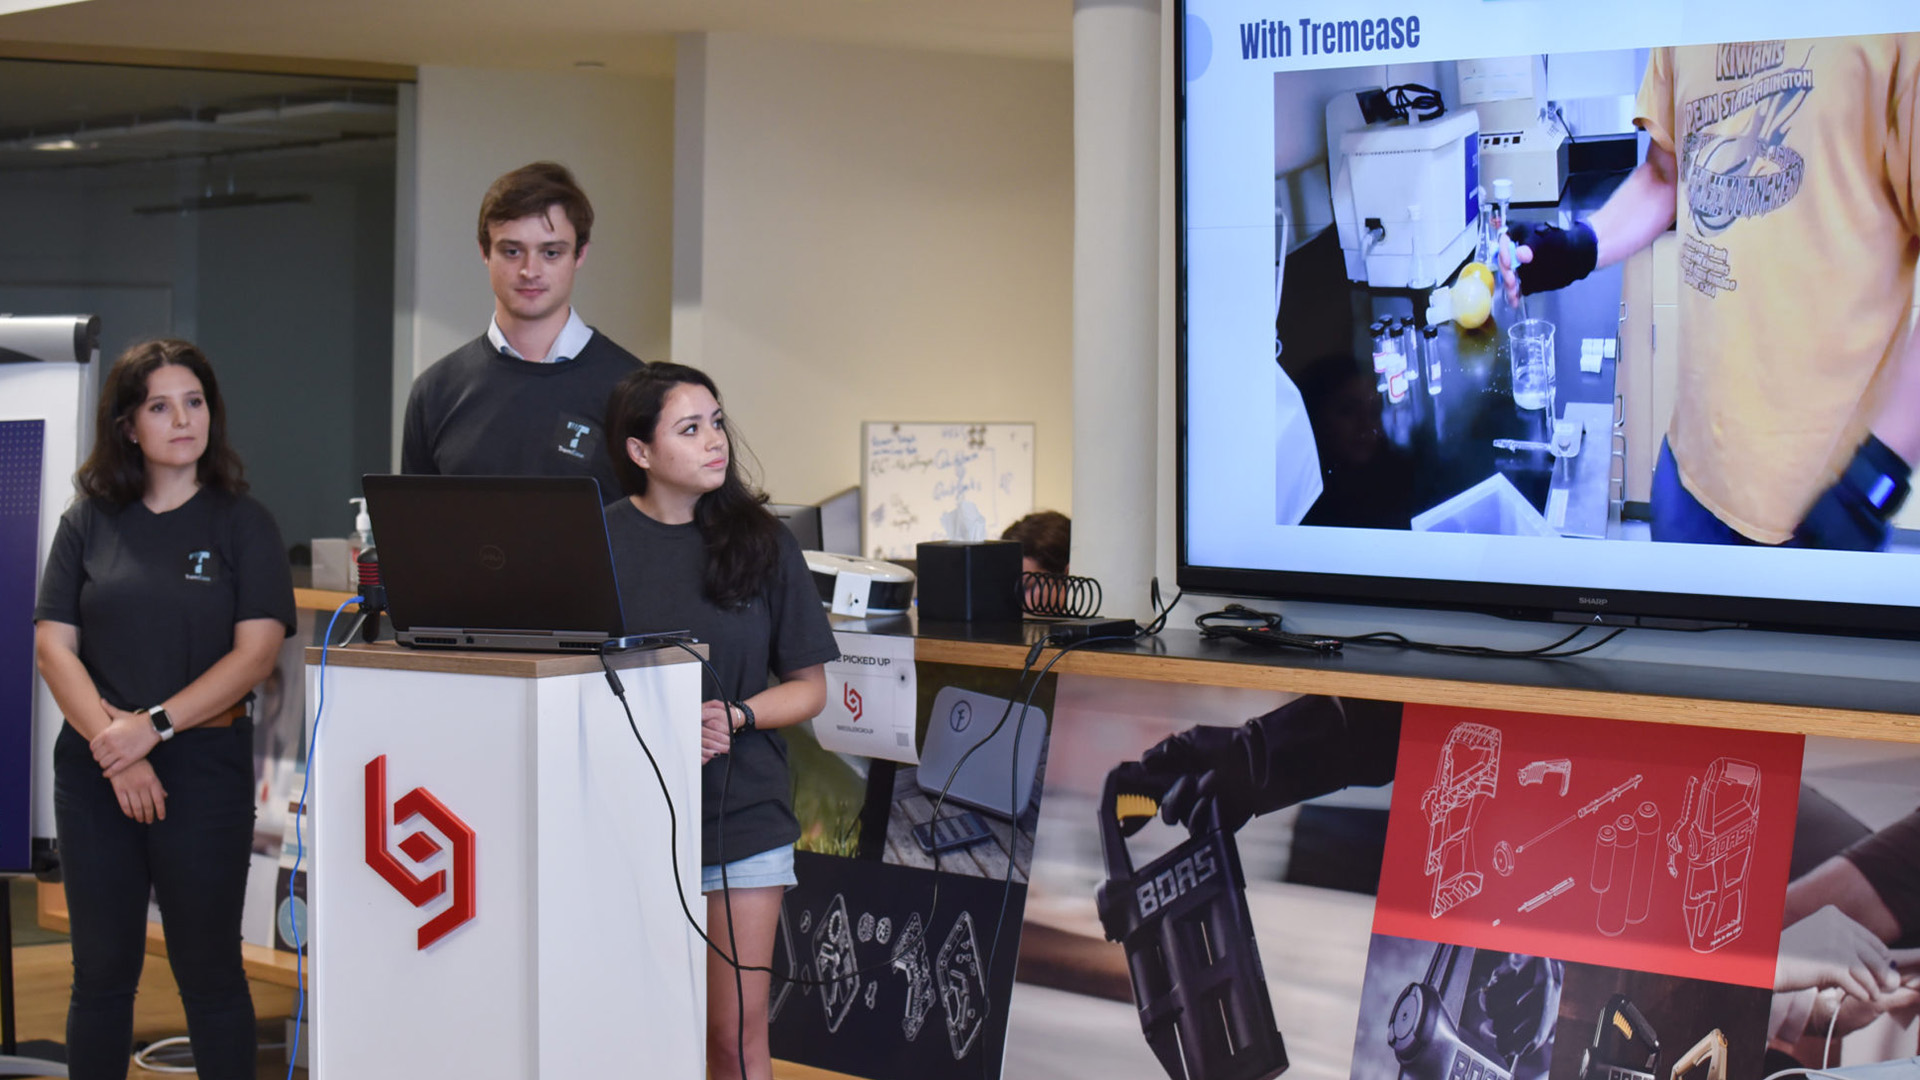 TremEase creators stand at a podium presenting with a laptop while a screen behind them displays their weighted glove design concept.